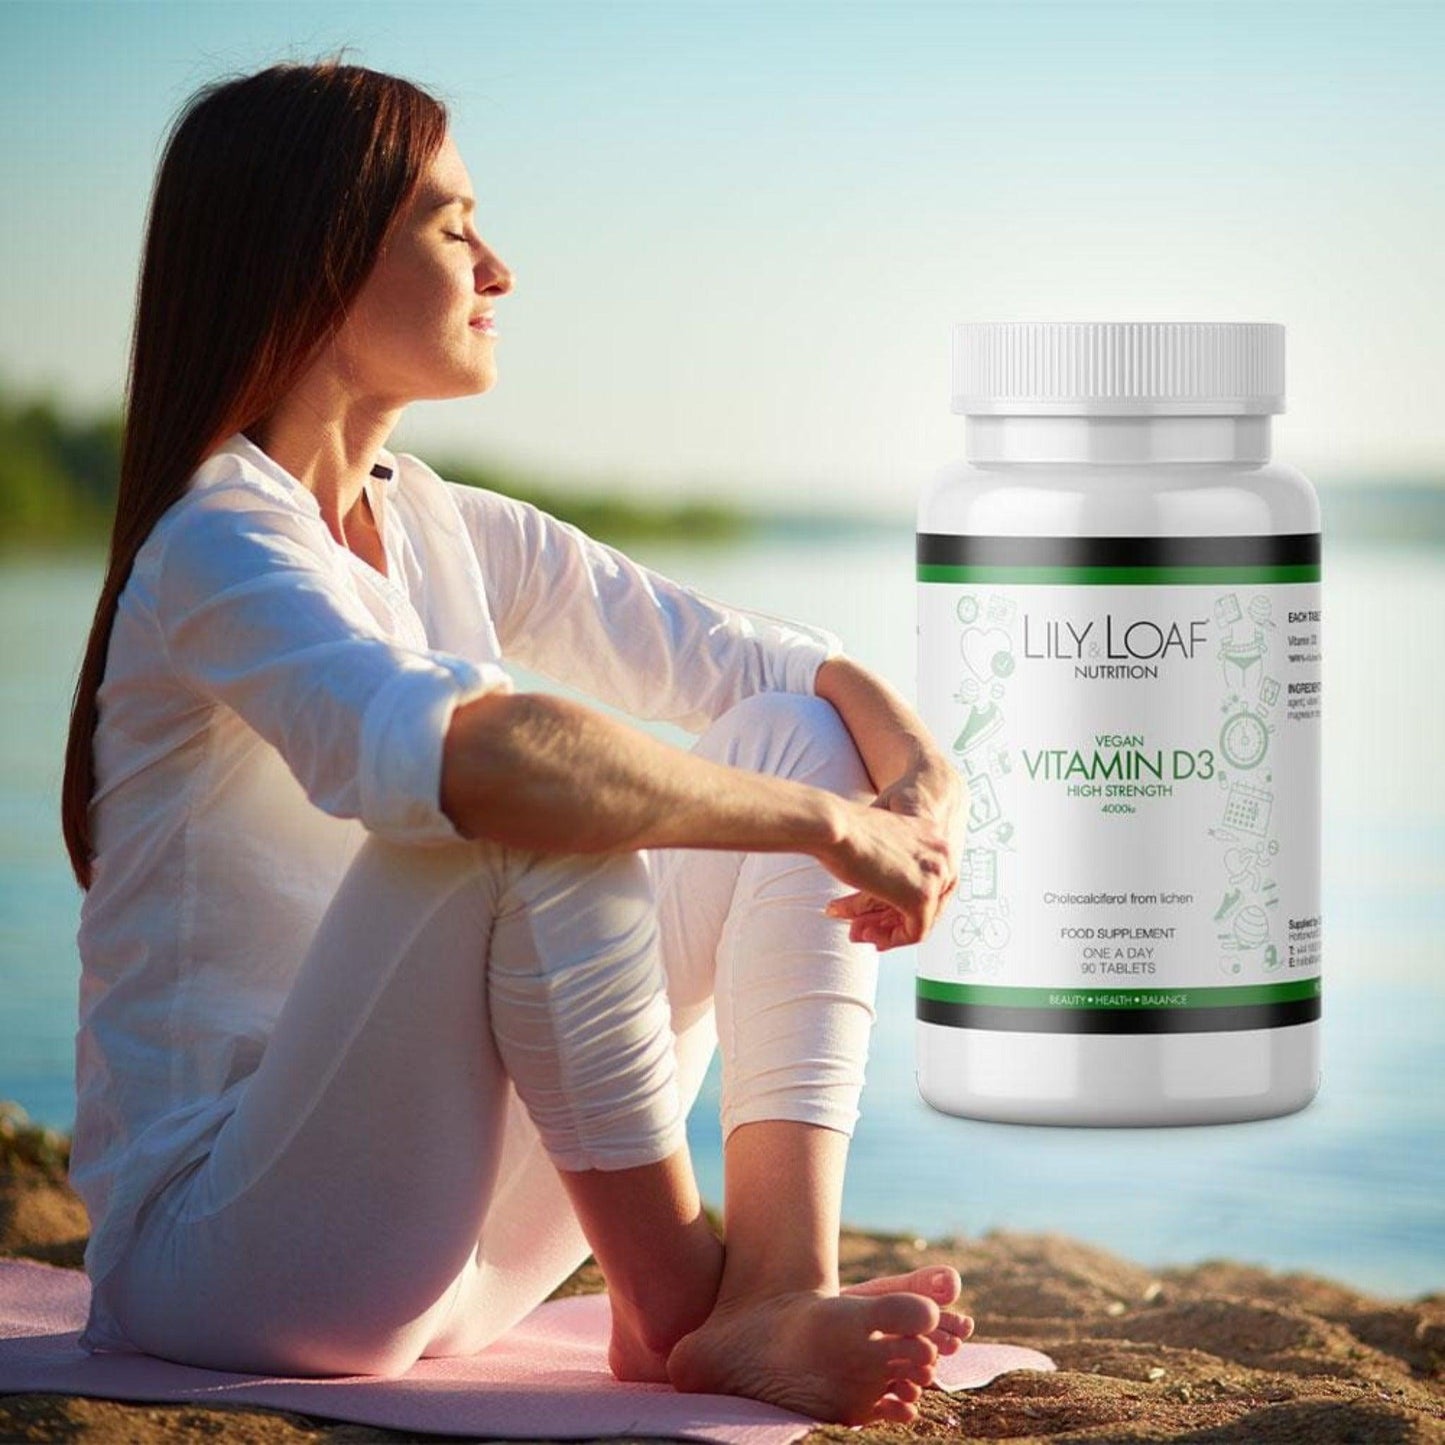 White bottle of Lily & Loaf Vegan Vitamin D3 supplement, high strength 4000IU, containing 90 vegan tablets for a 90-day supply.